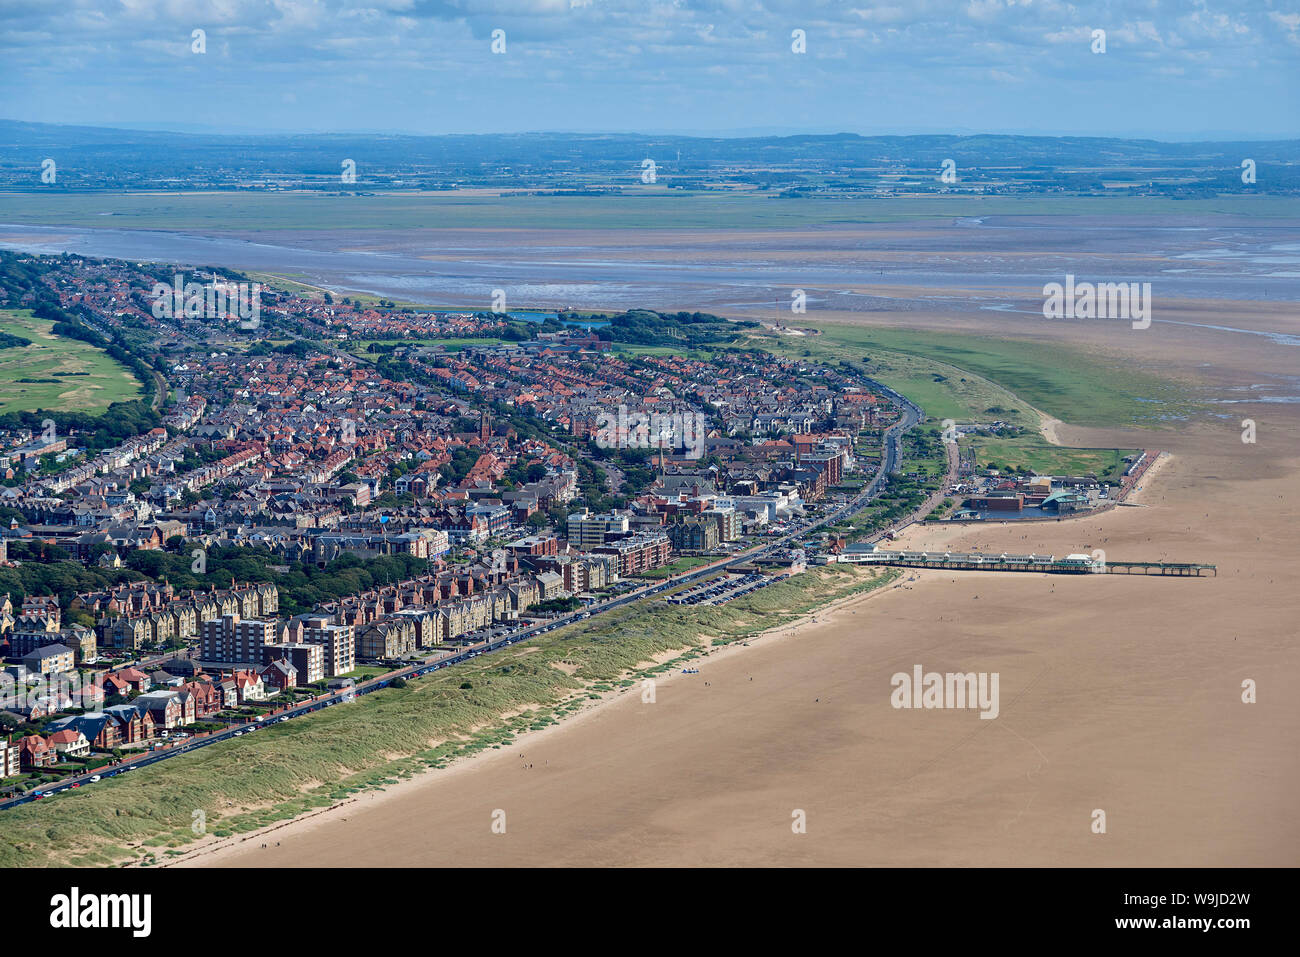 An aerial view of Lytham St Annes, Fylde Coast, North West England, UK Stock Photo